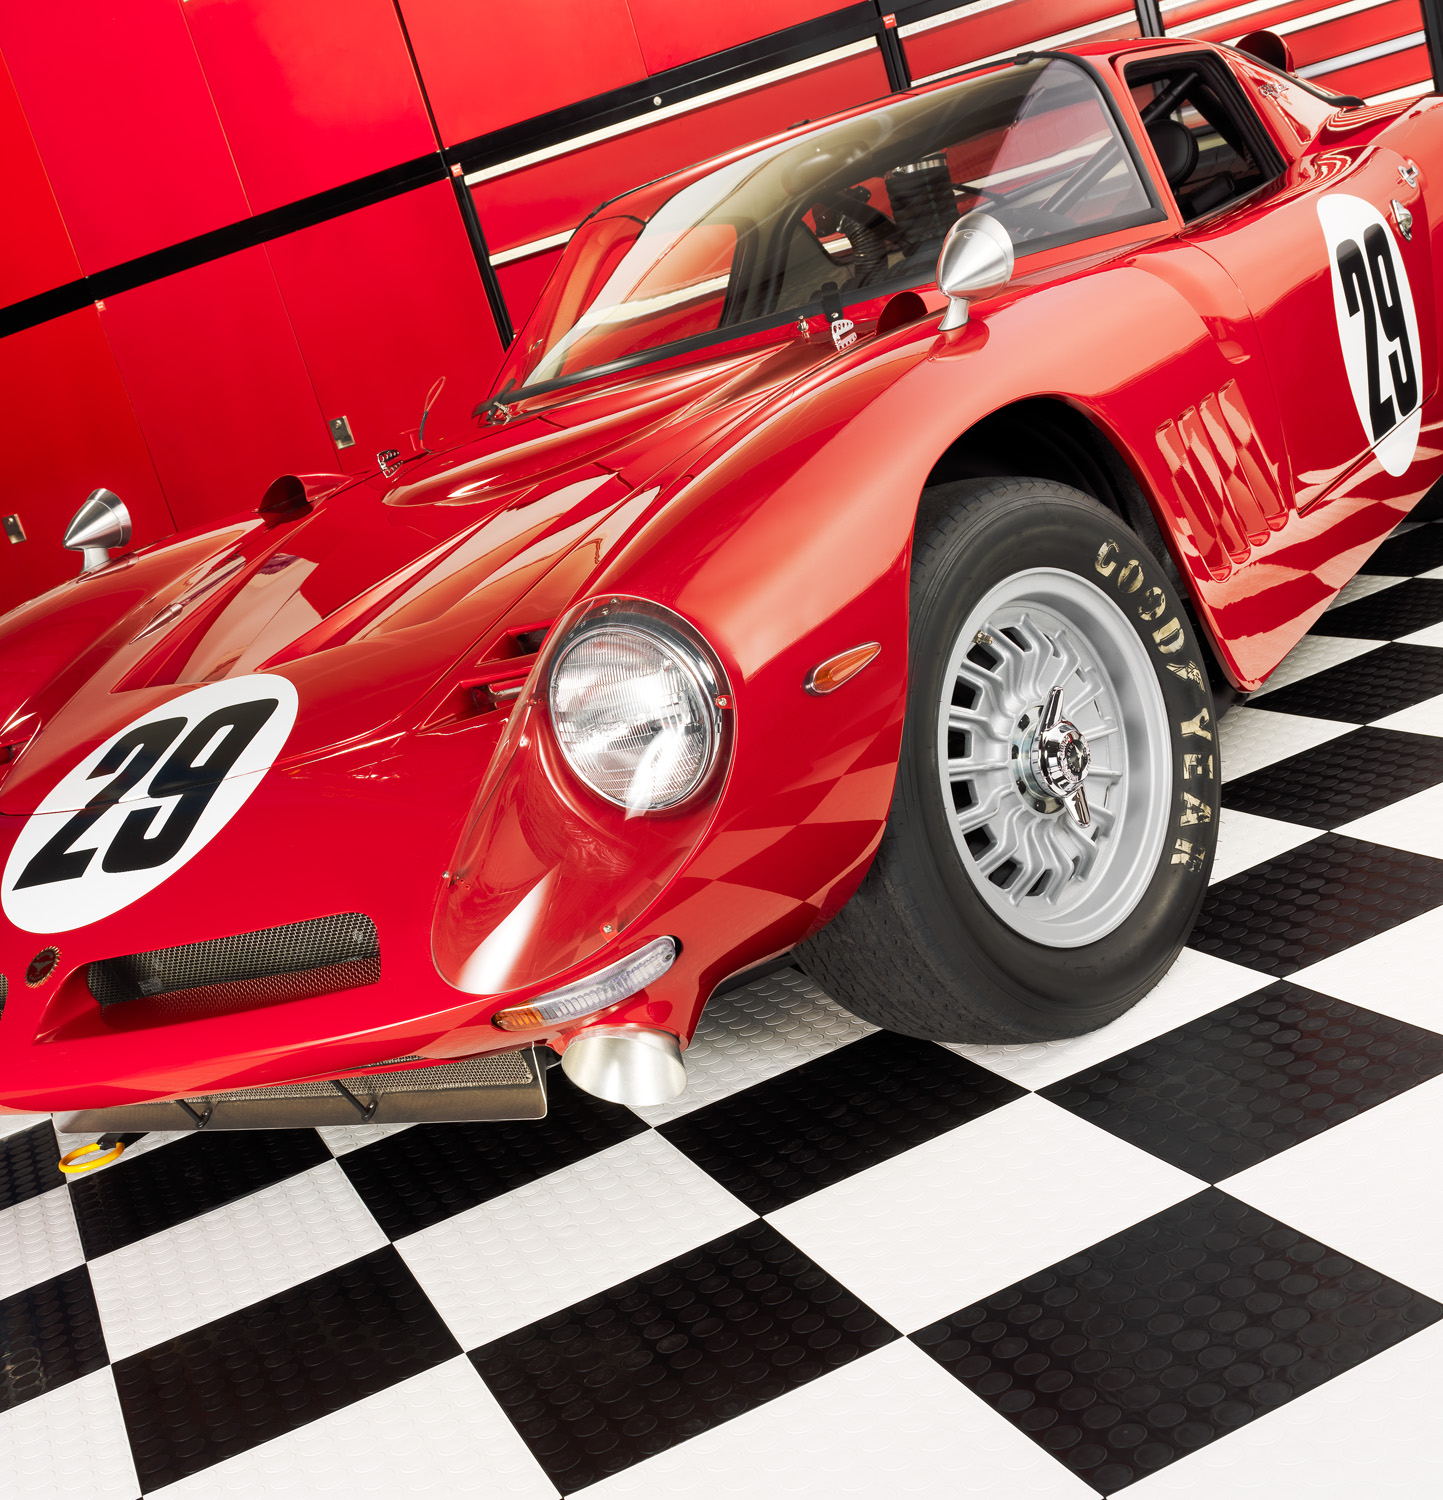 Red 29 race car on checkered floor mats for Griots Garage  — Studio 3, Inc.